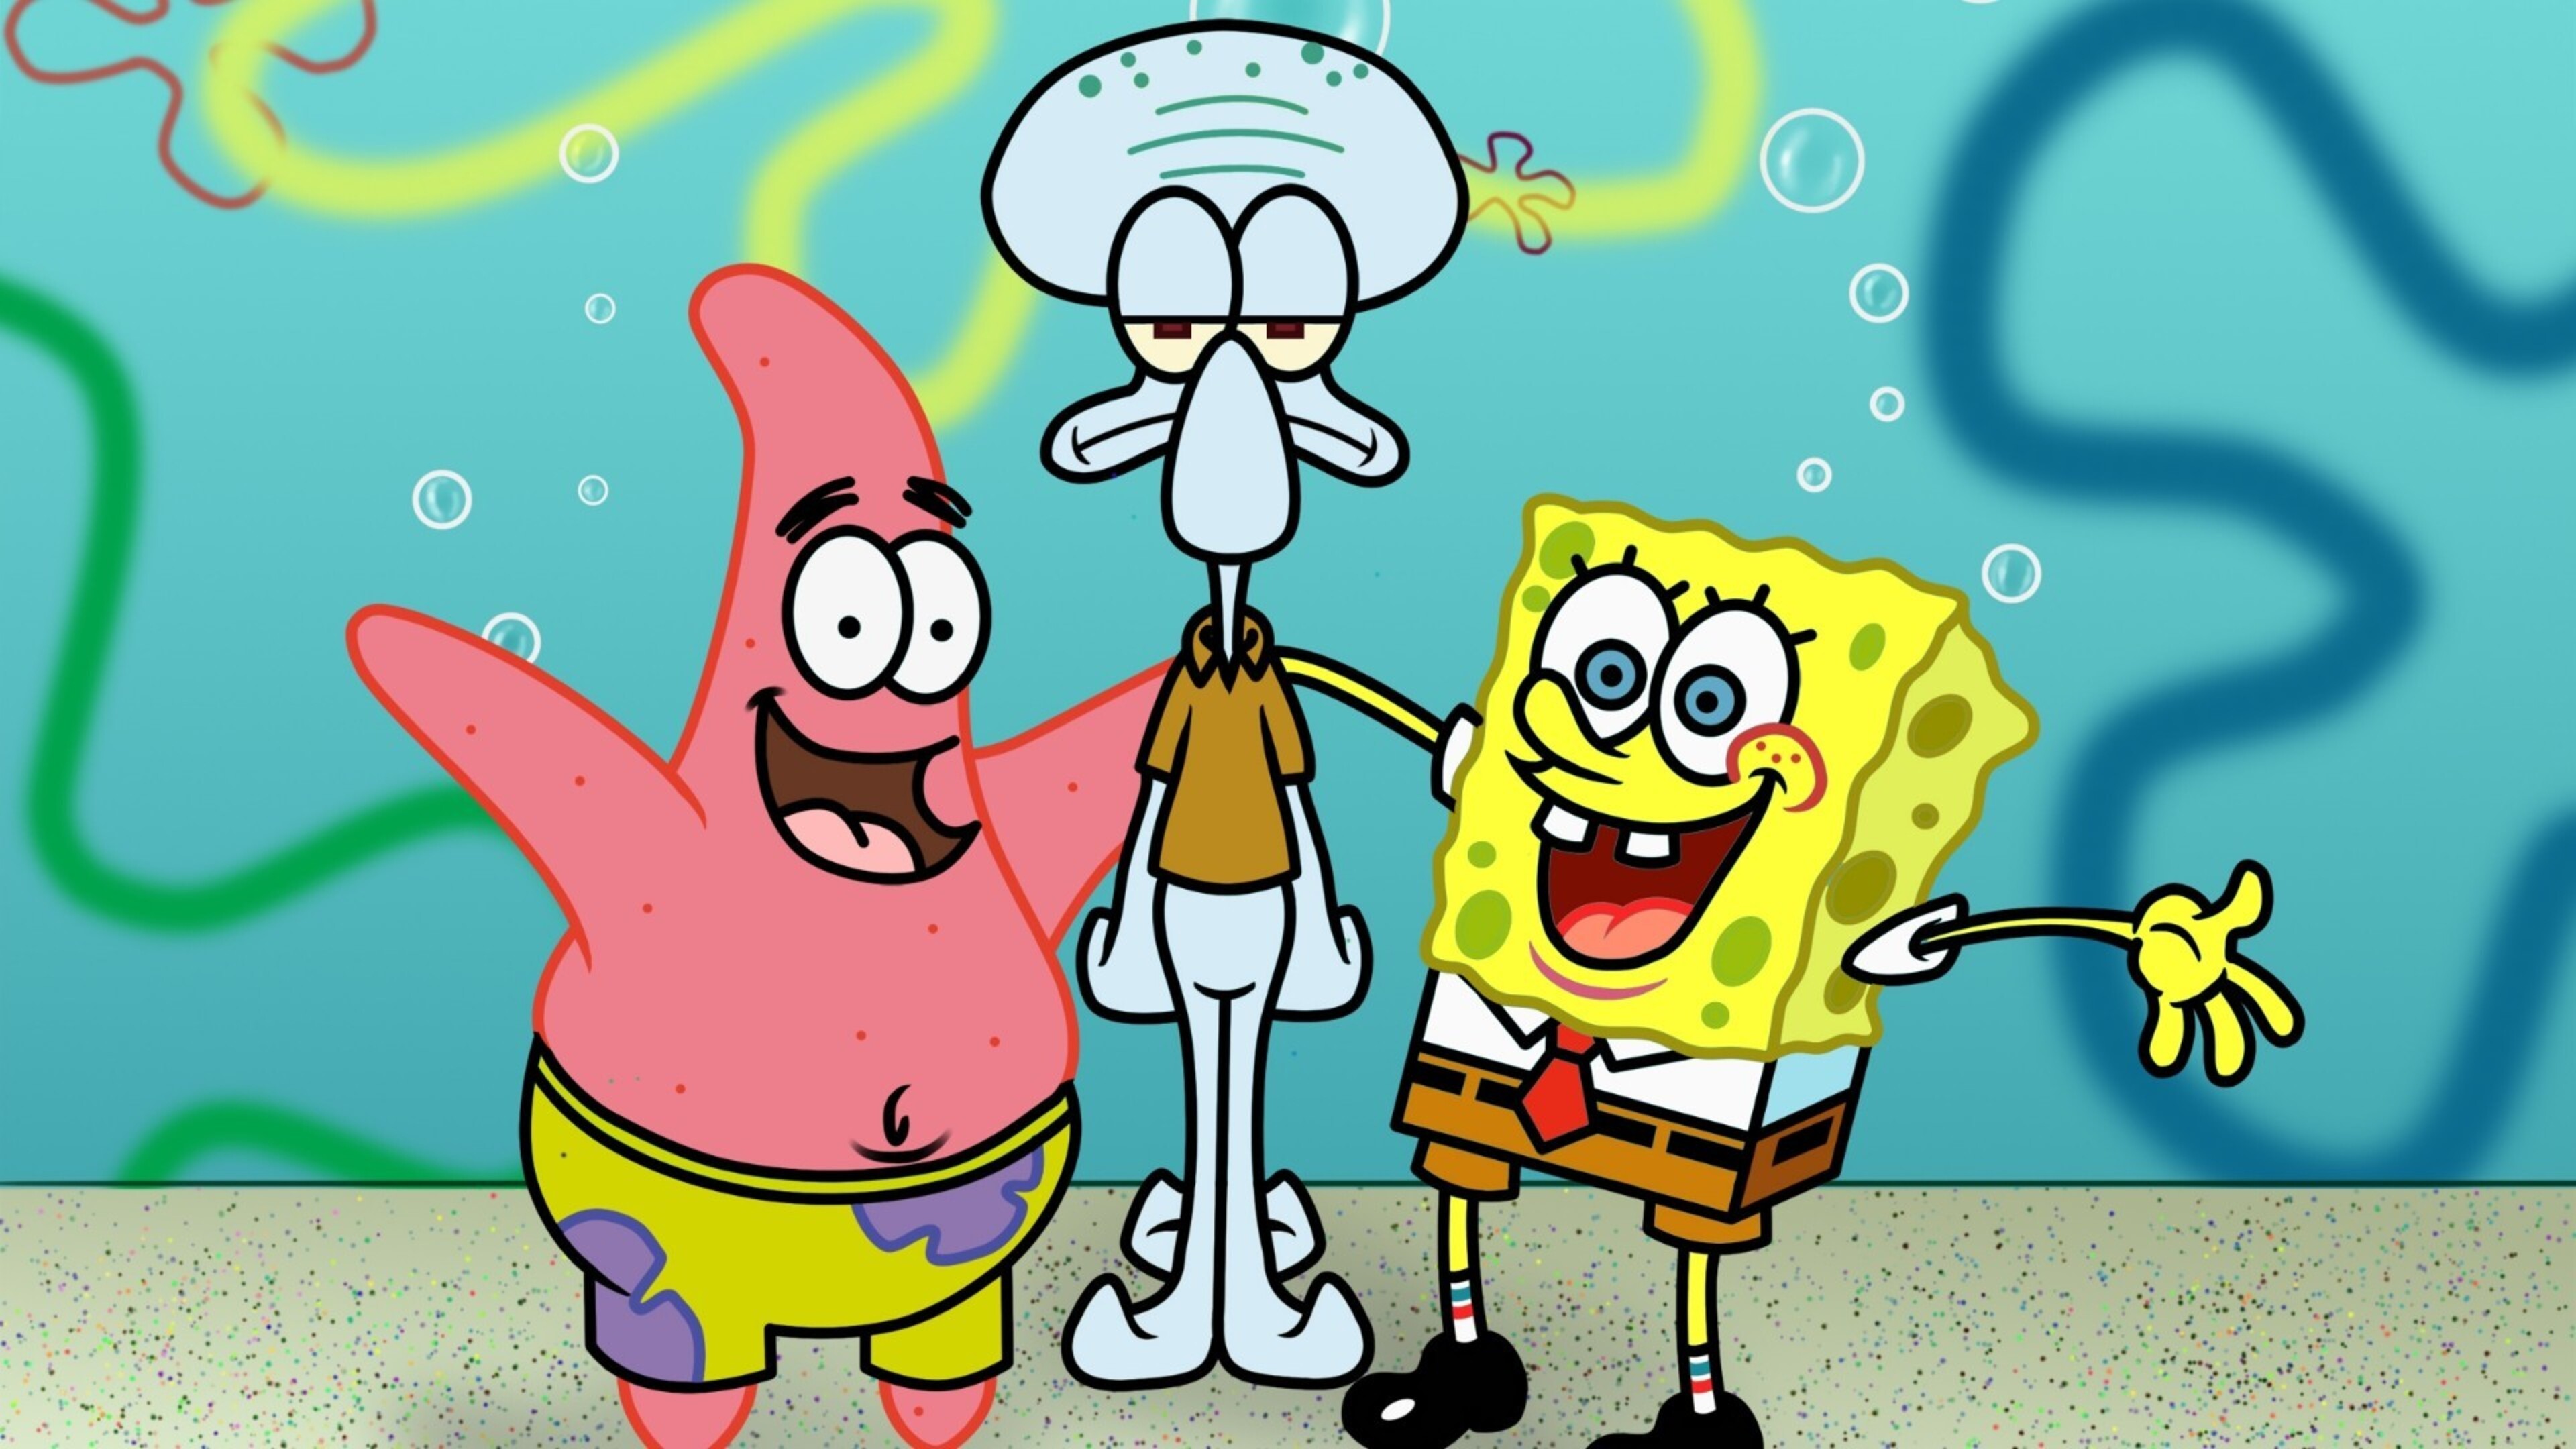 3840x2160 Spongebob Squarepants 4k HD 4k Wallpapers, Images, Backgrounds, Photos and Pictures